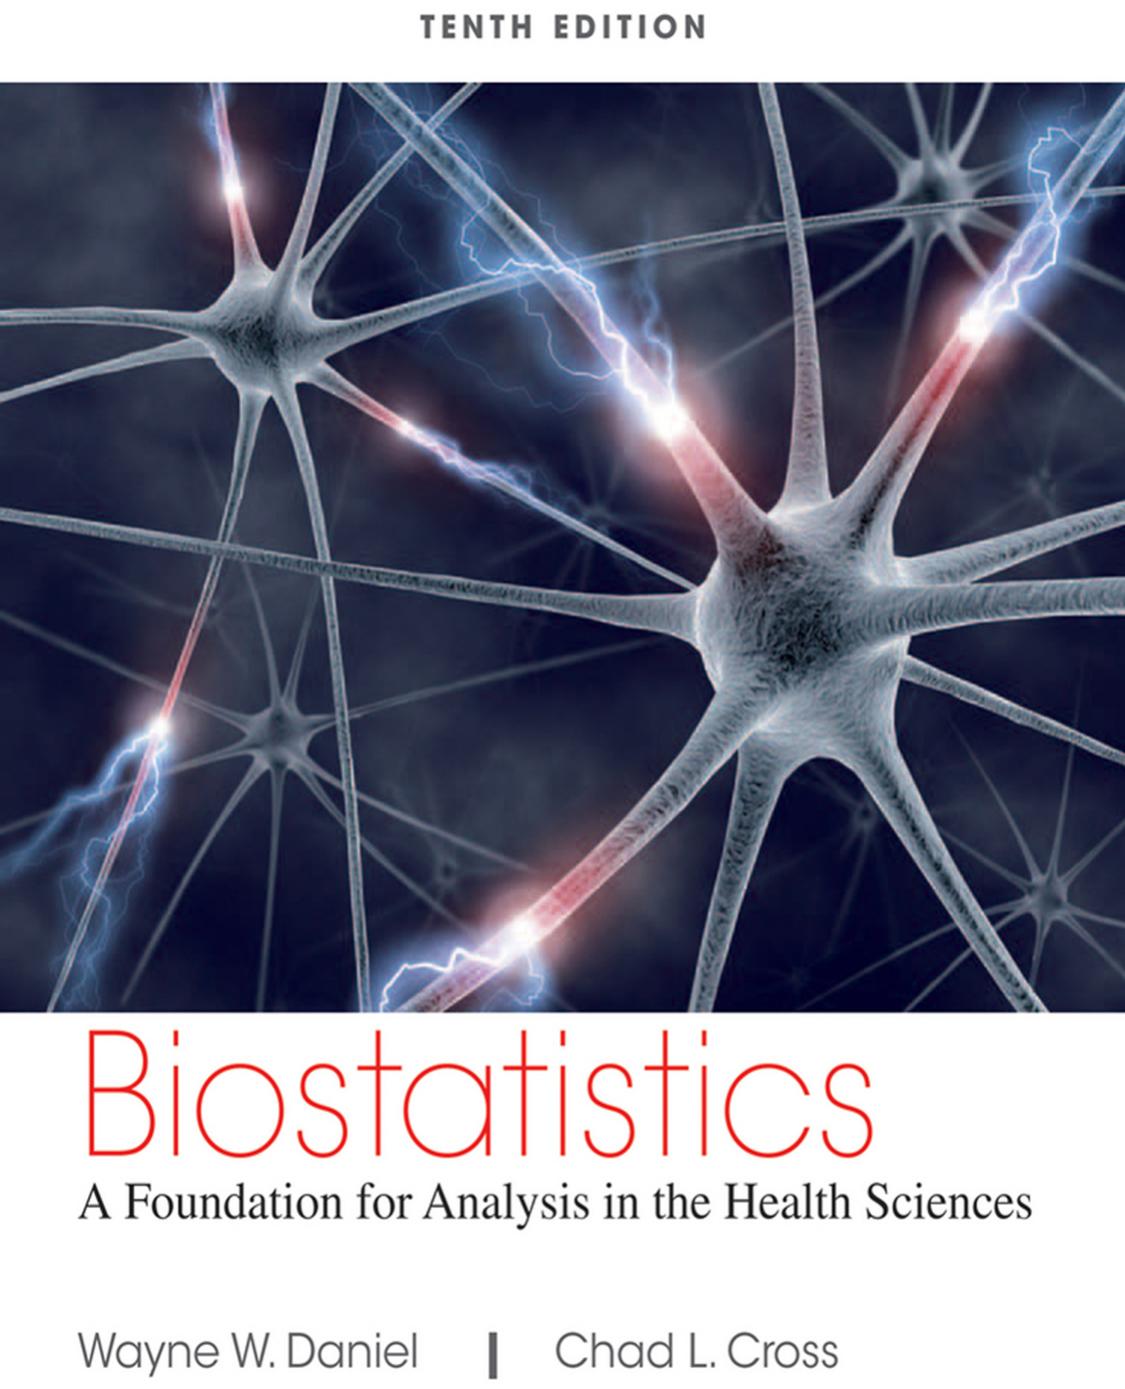 Biostatistics: A Foundation for Analysis in the Health Sciences, 10th Edition